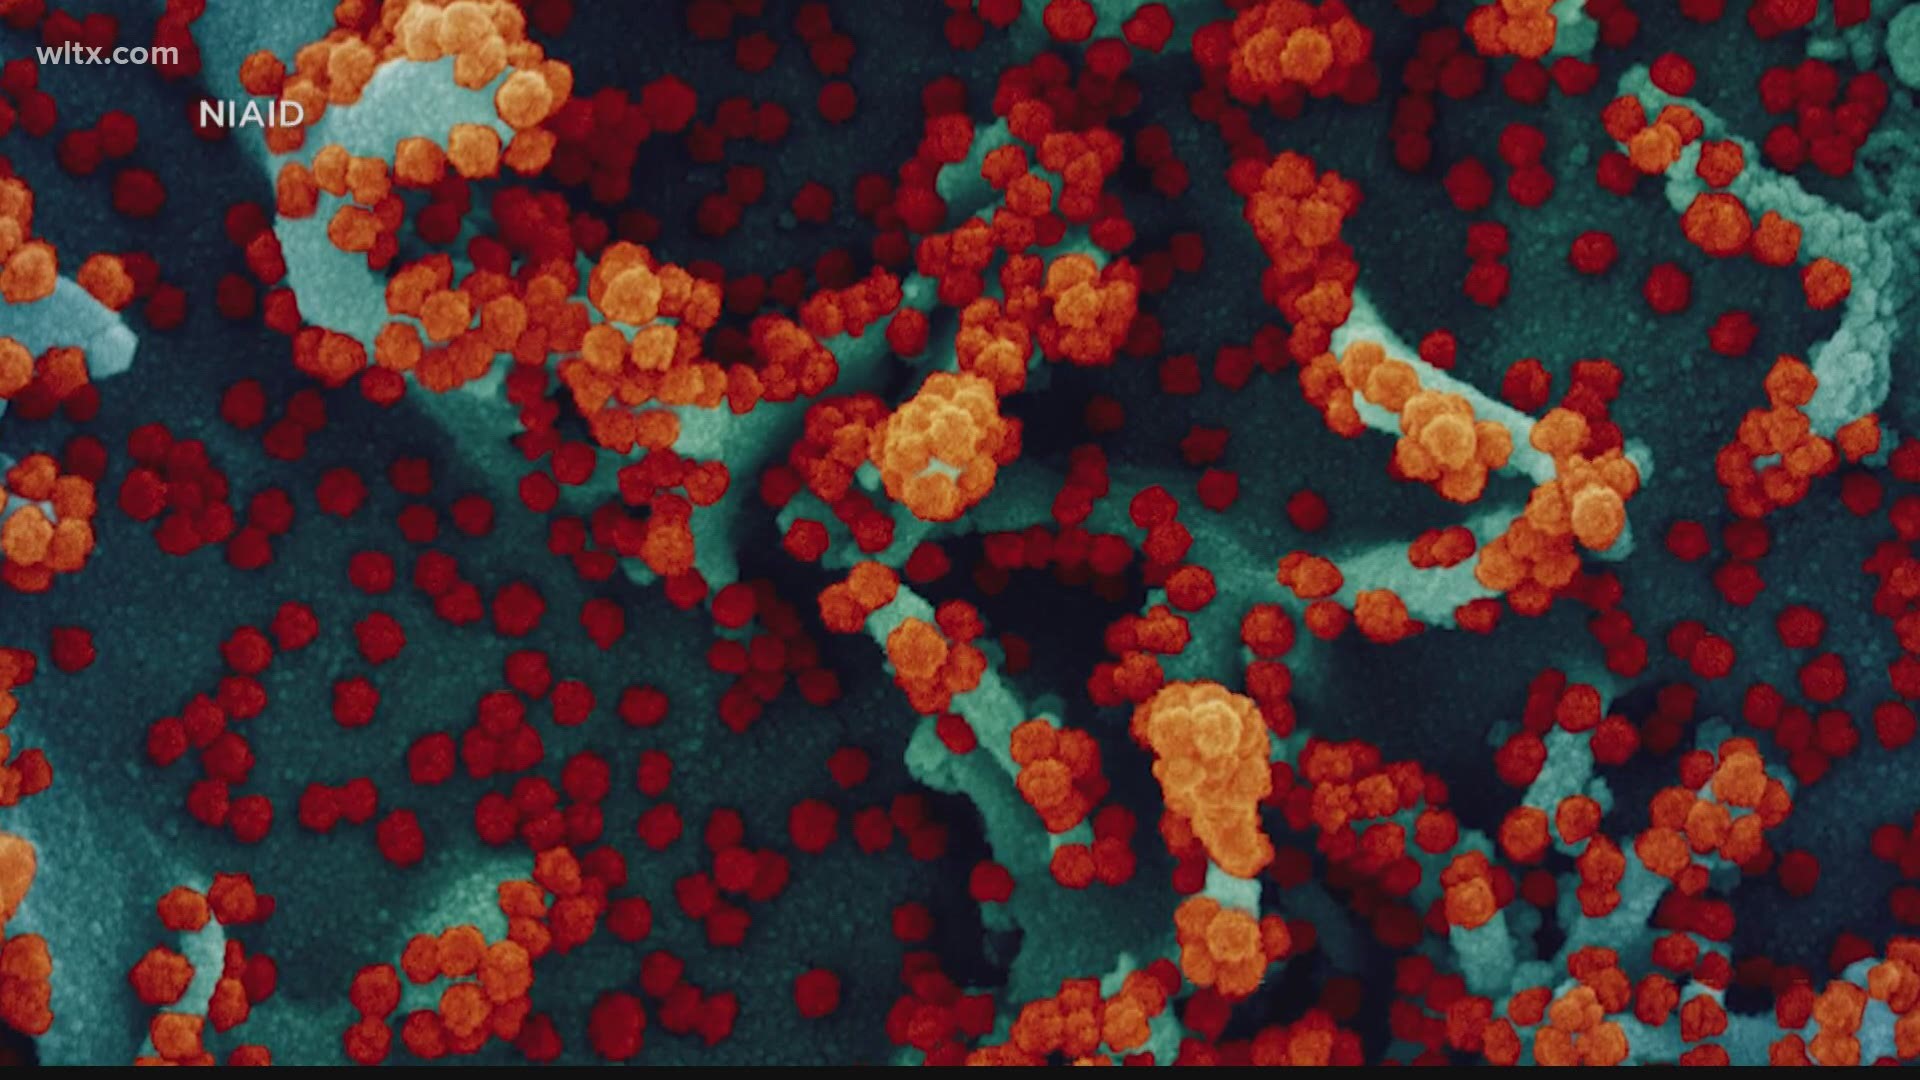 Deadspin' Is Alive, Relaunches Early To Cover Coronavirus Impact